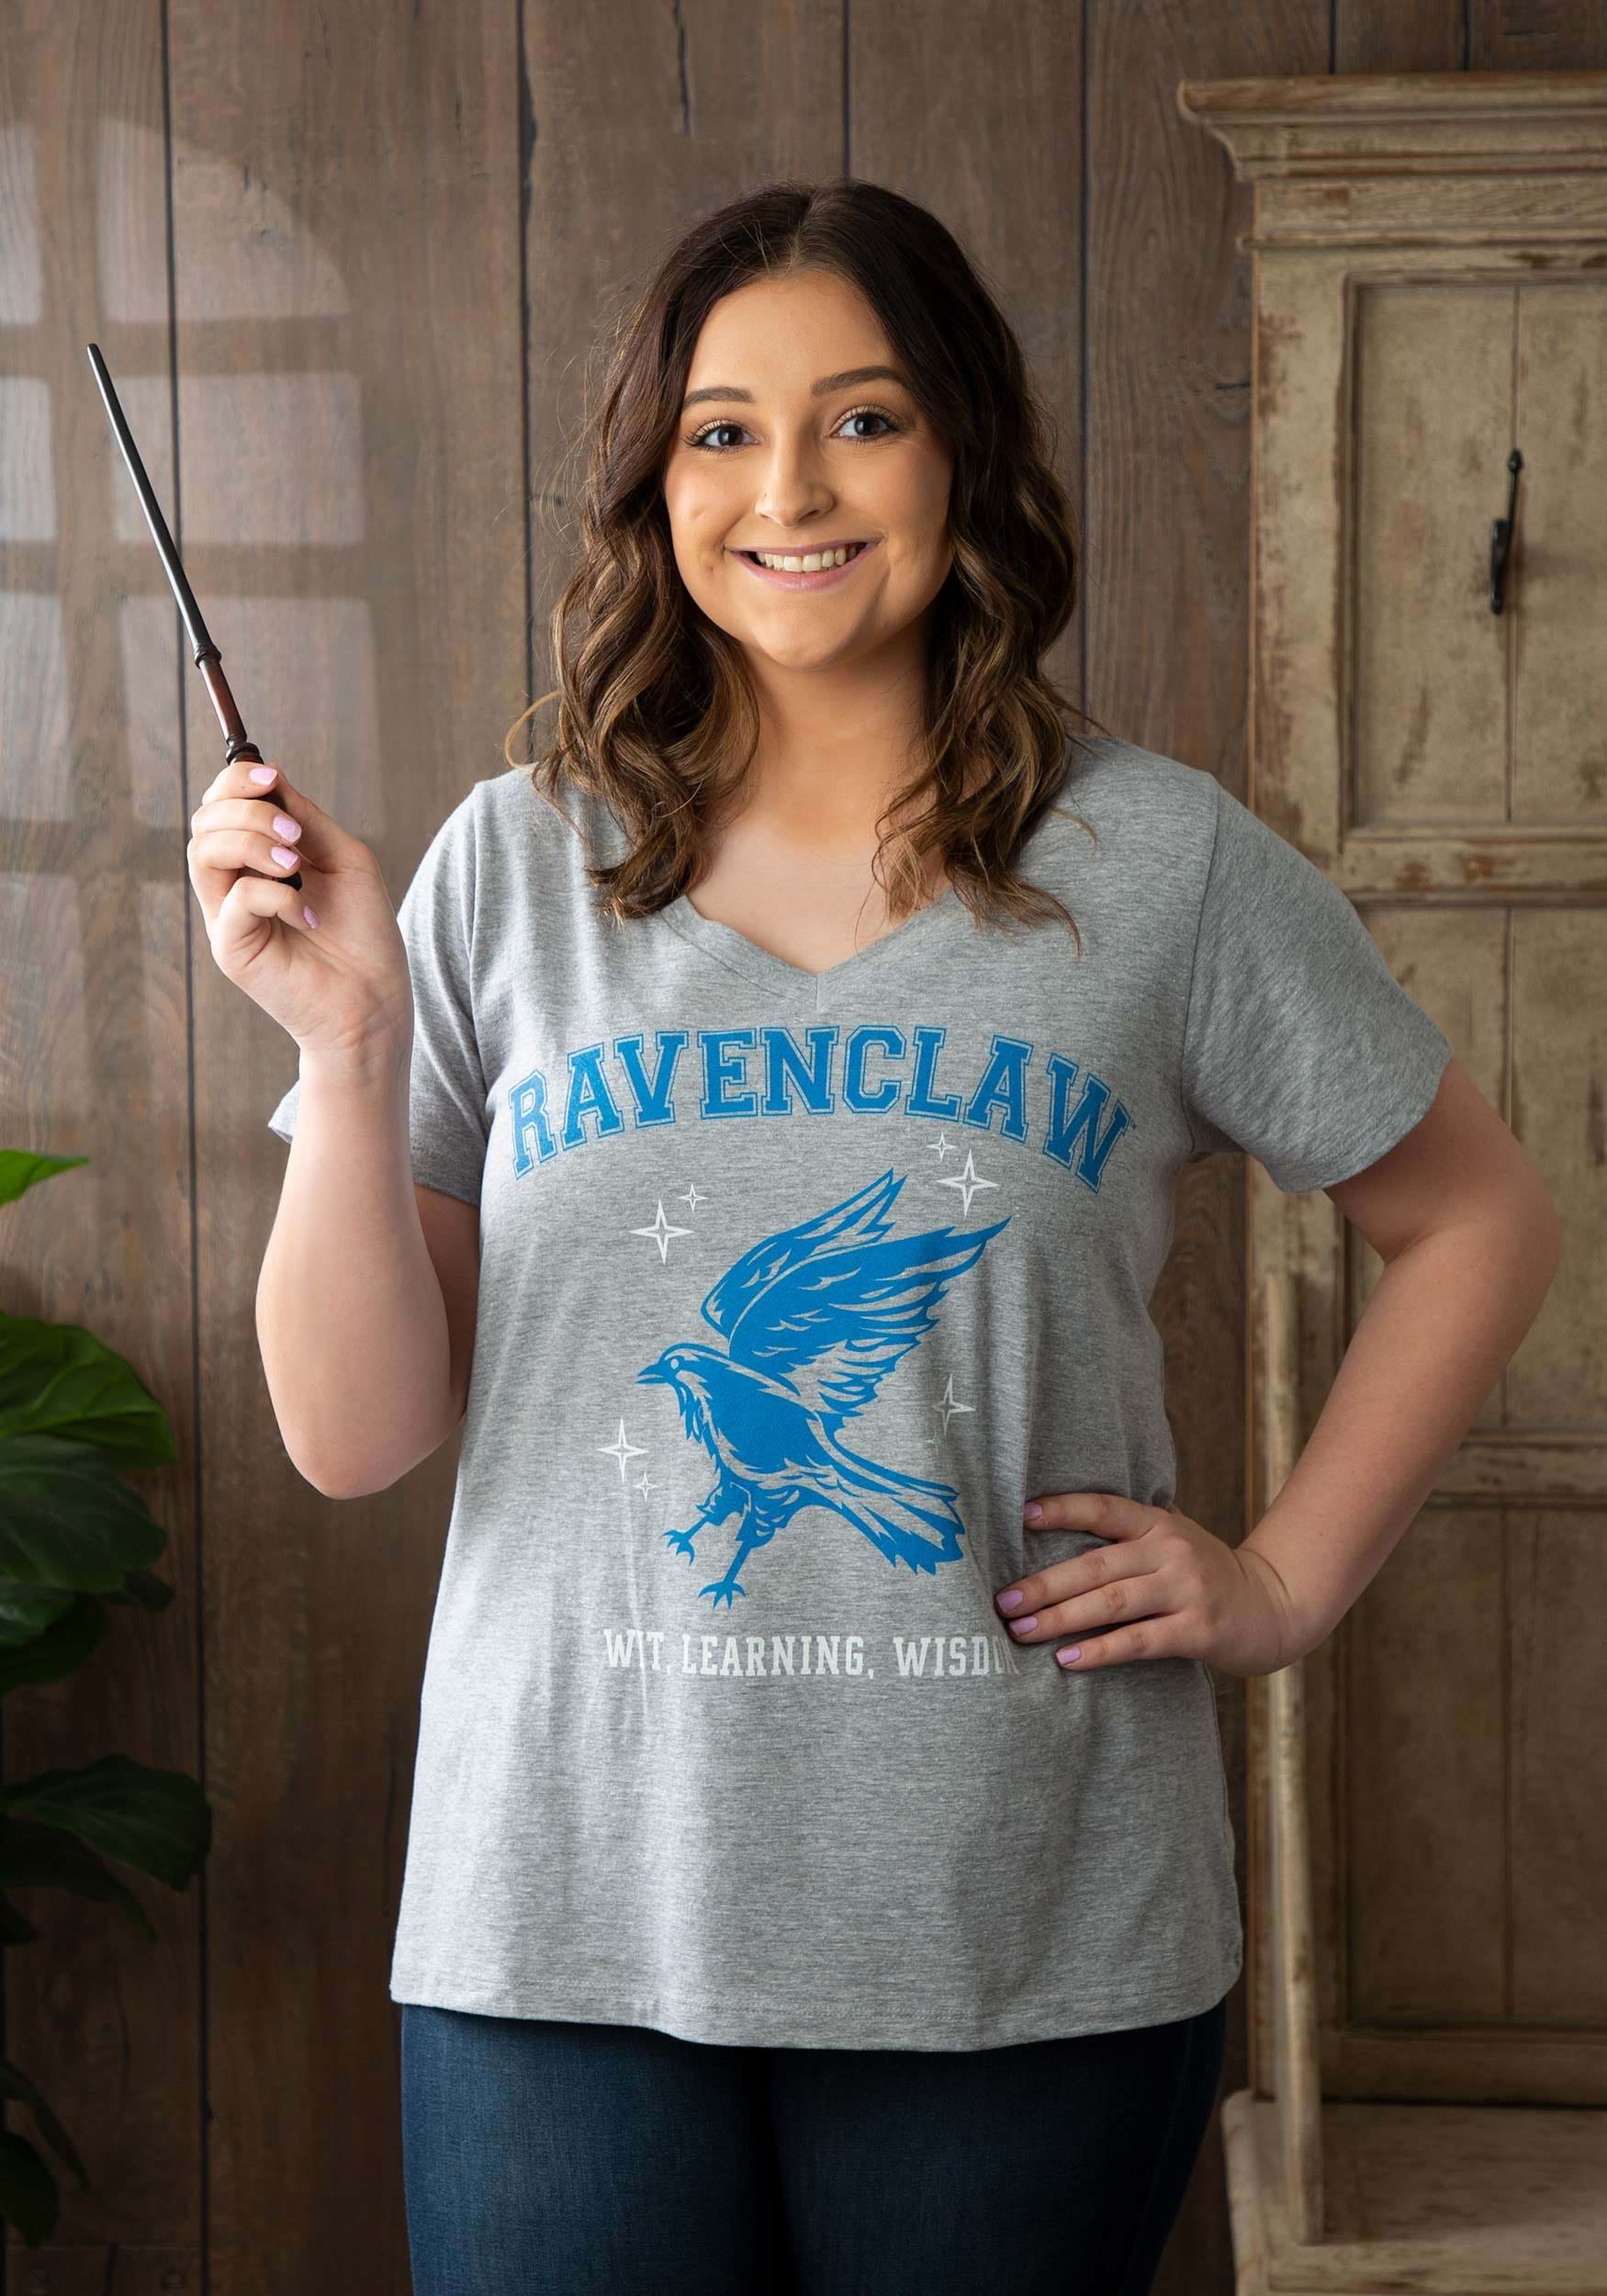 Ravenclaw Plus Size V-neck Tee for Women